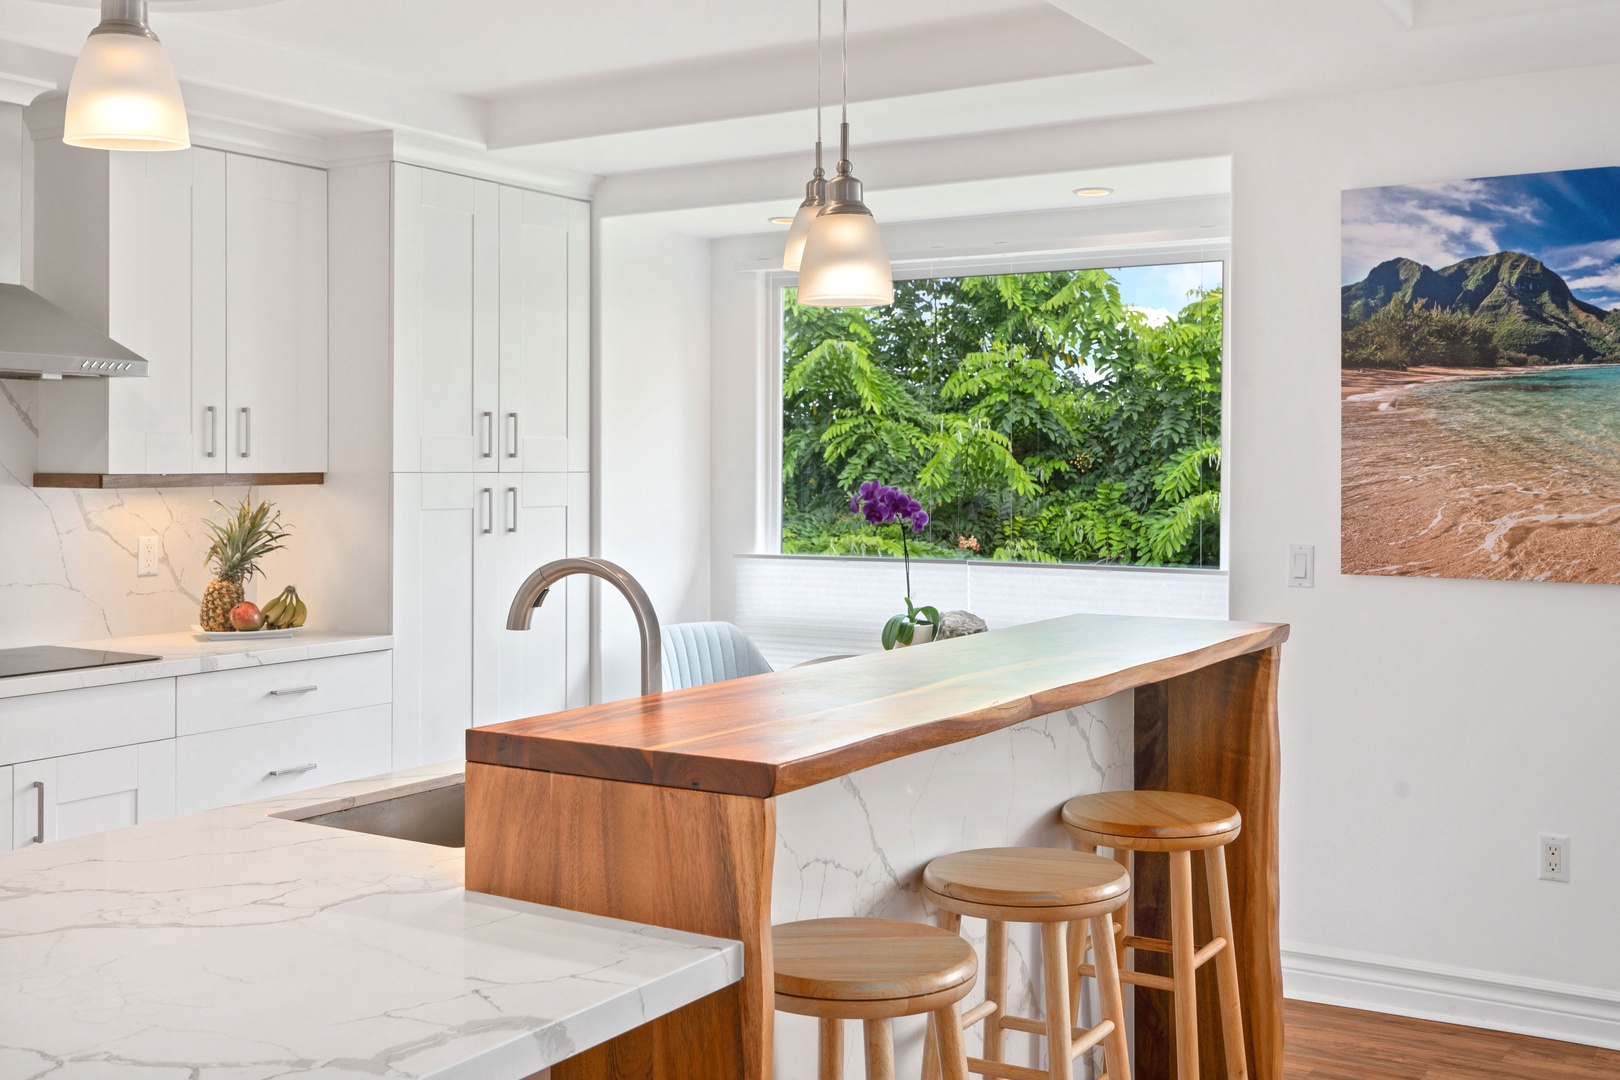 Princeville Vacation Rentals, Tropical Elegance - Modern kitchen with bar seating, ideal for vacation breakfasts and gatherings.